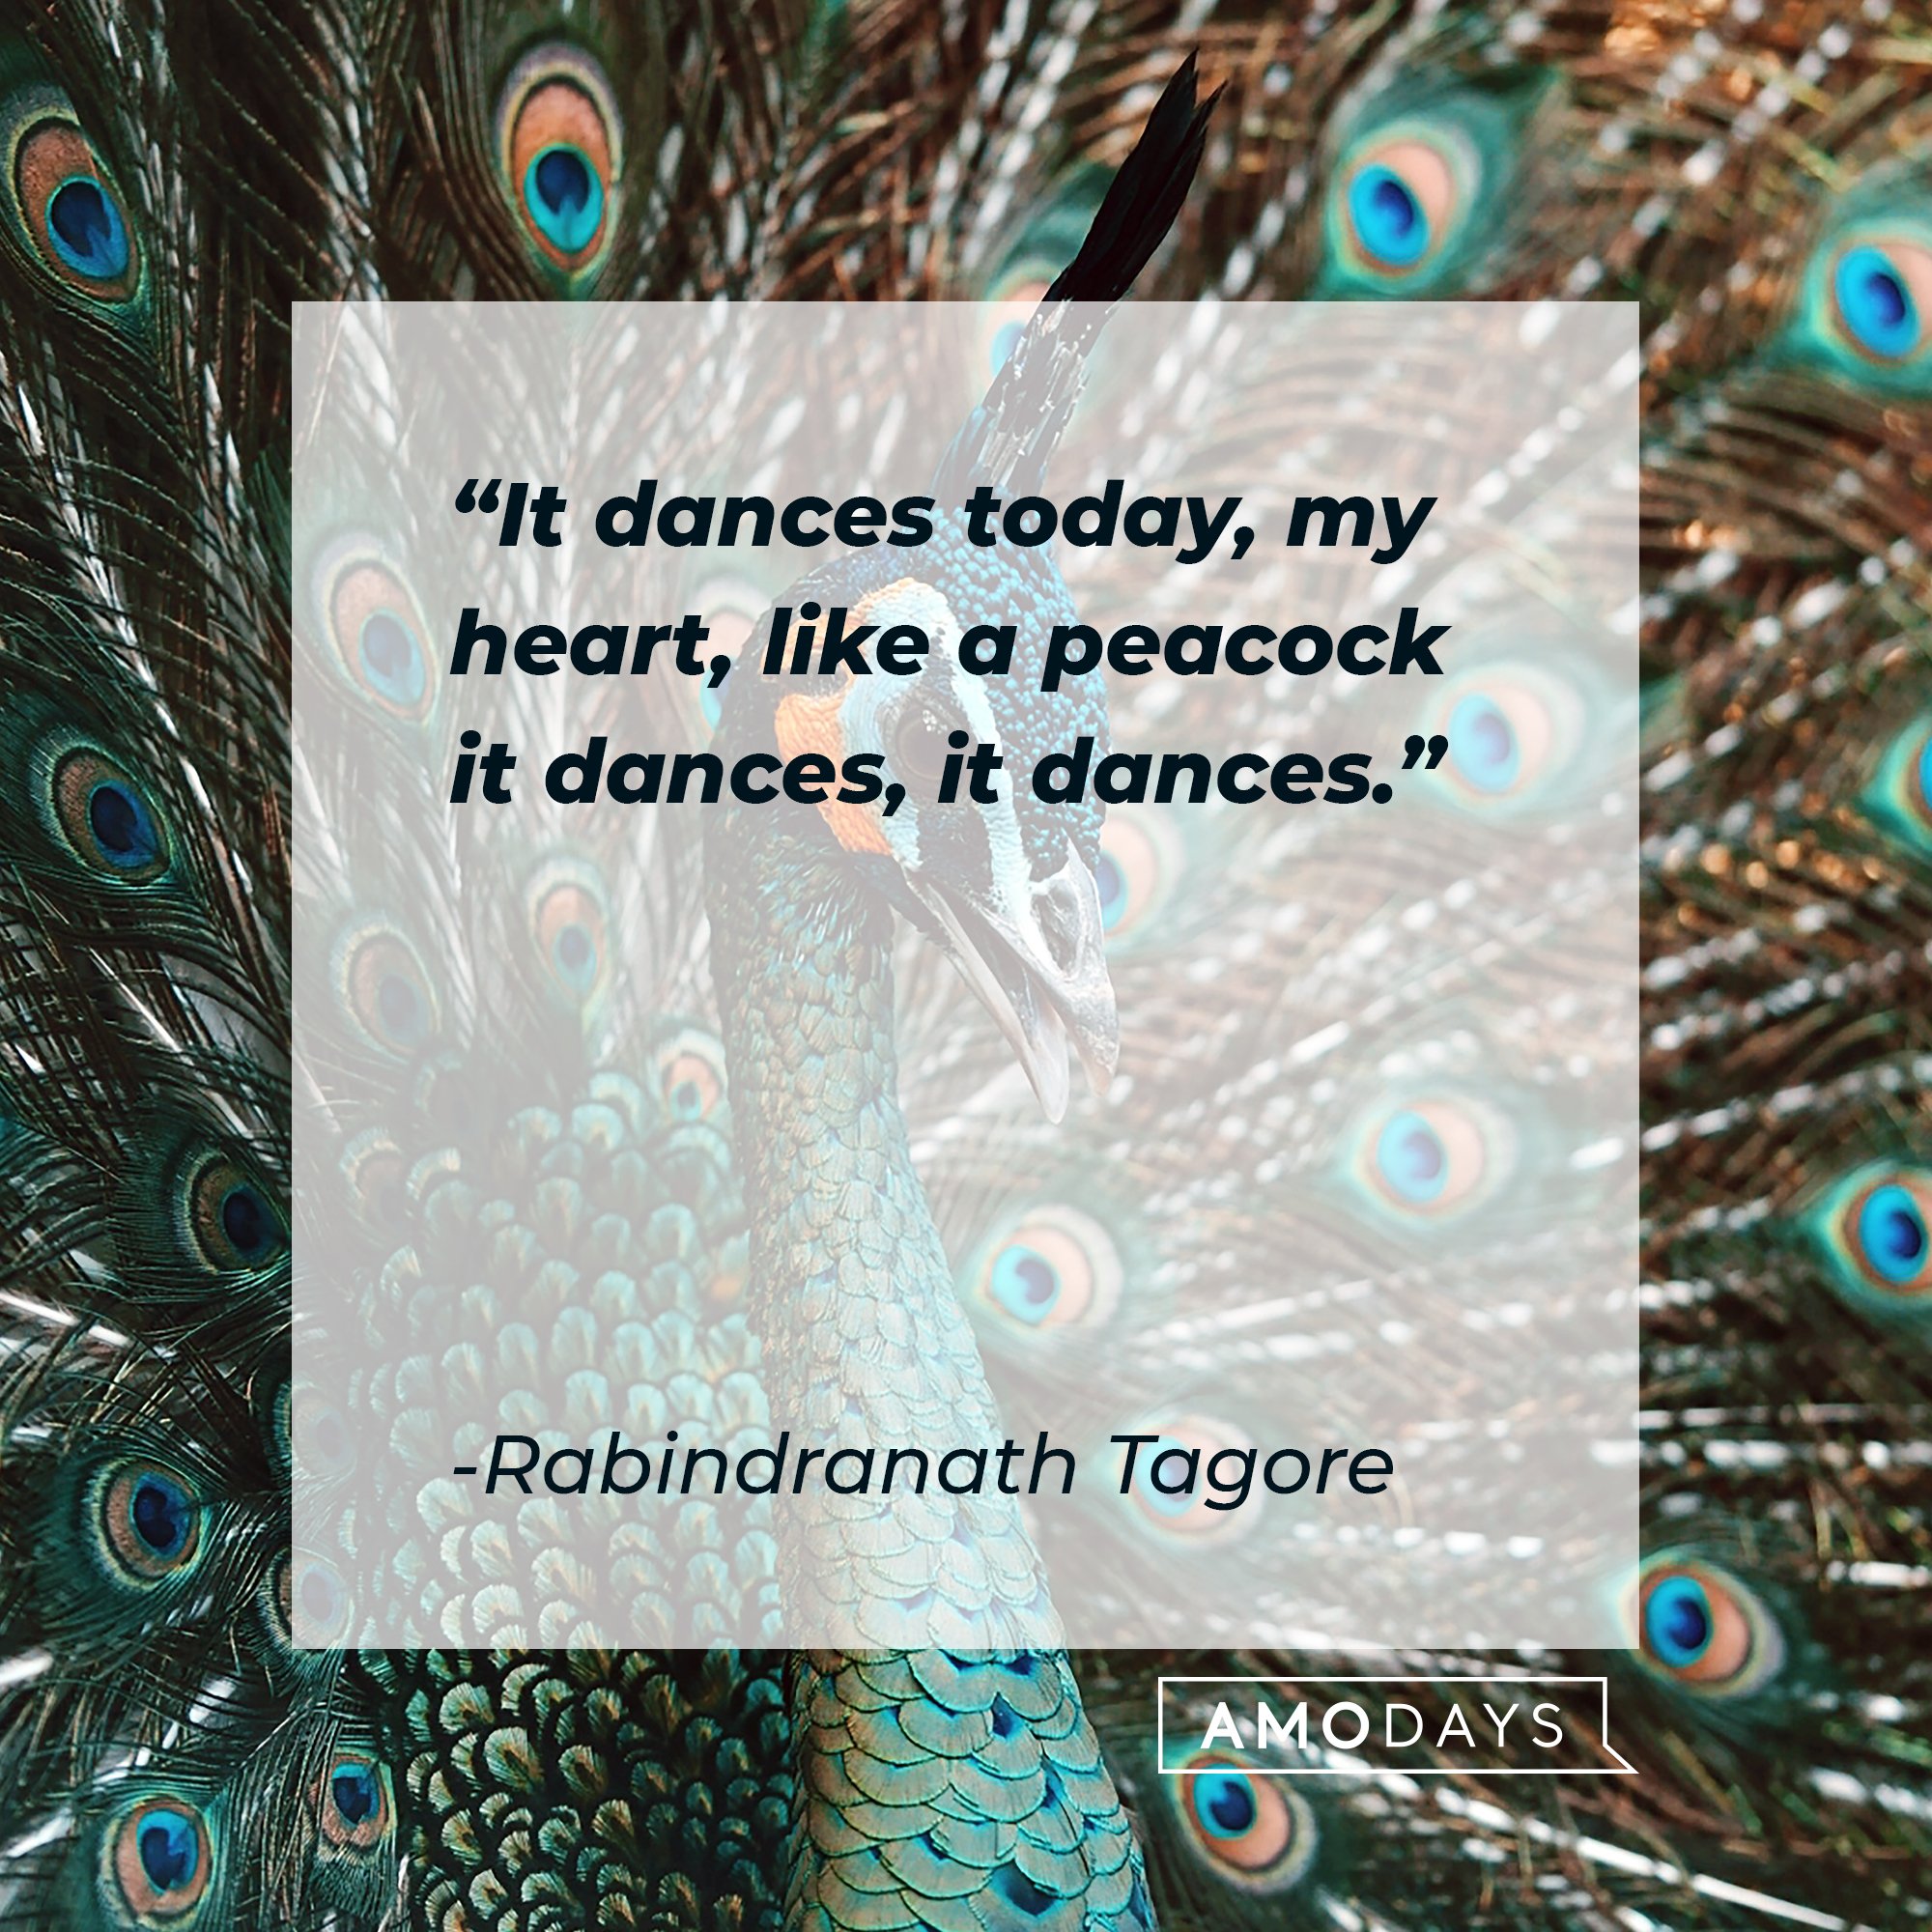 Rabindranath Tagore’s "It dances today, my heart, like a peacock it dances, it dances." | Image: AmoDays